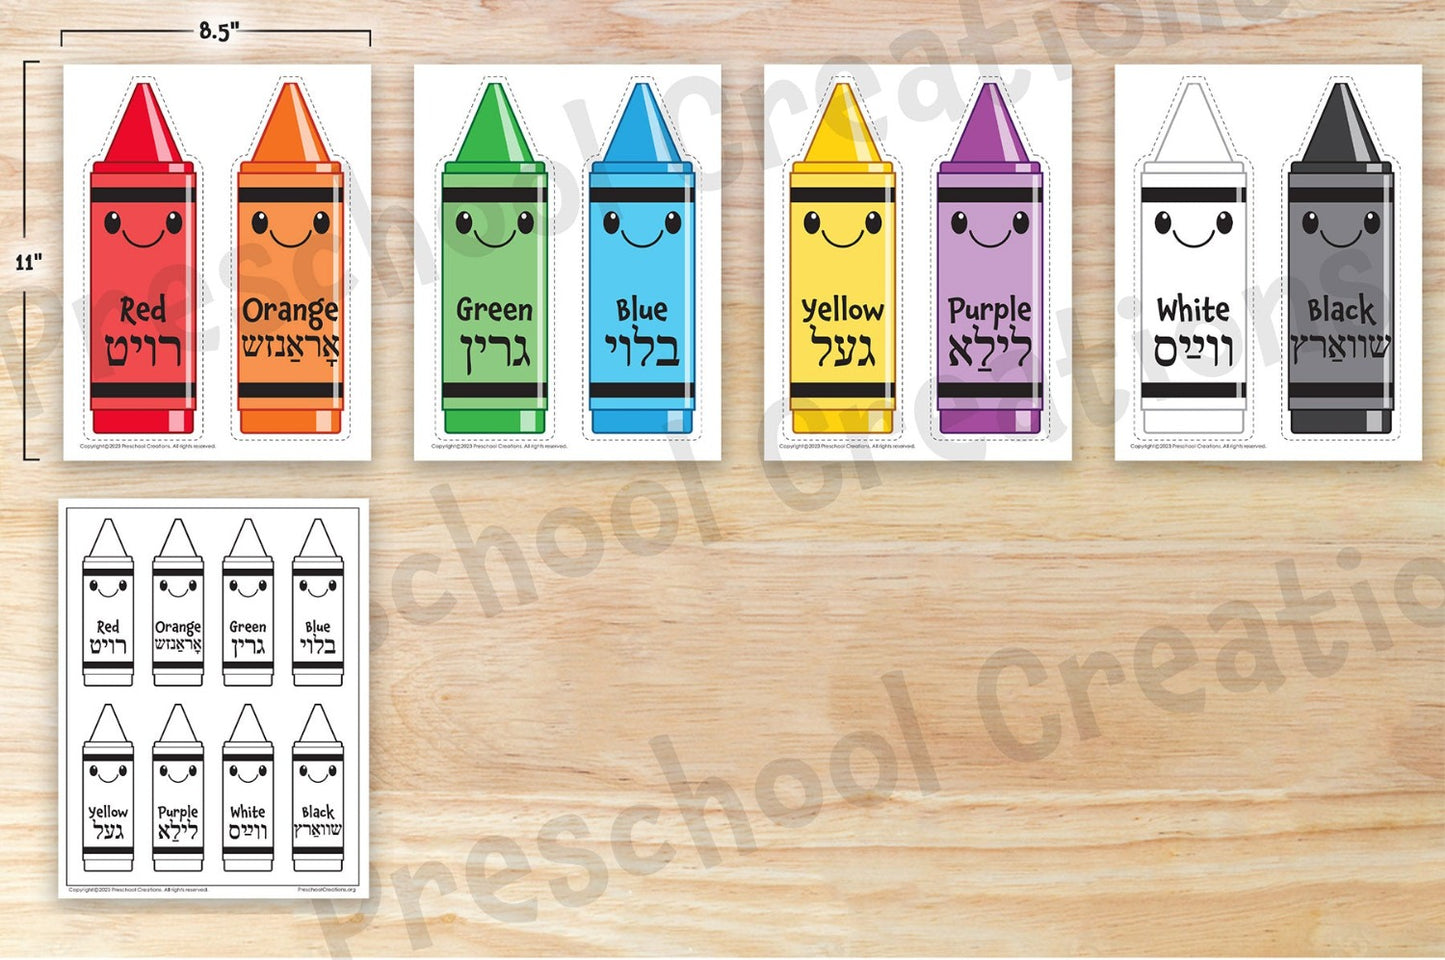 4 pages of basic colors + bonus coloring page  Brighten up your classroom with our Basic Colors posters in Yiddish/English! This eye-catching décor will add color and style to your space while teaching your students a valuable lesson - learning fun colors in a second language! Bring your classroom to life with this vibrant decoration!   Includes a special bonus coloring page so your students can test their knowledge.